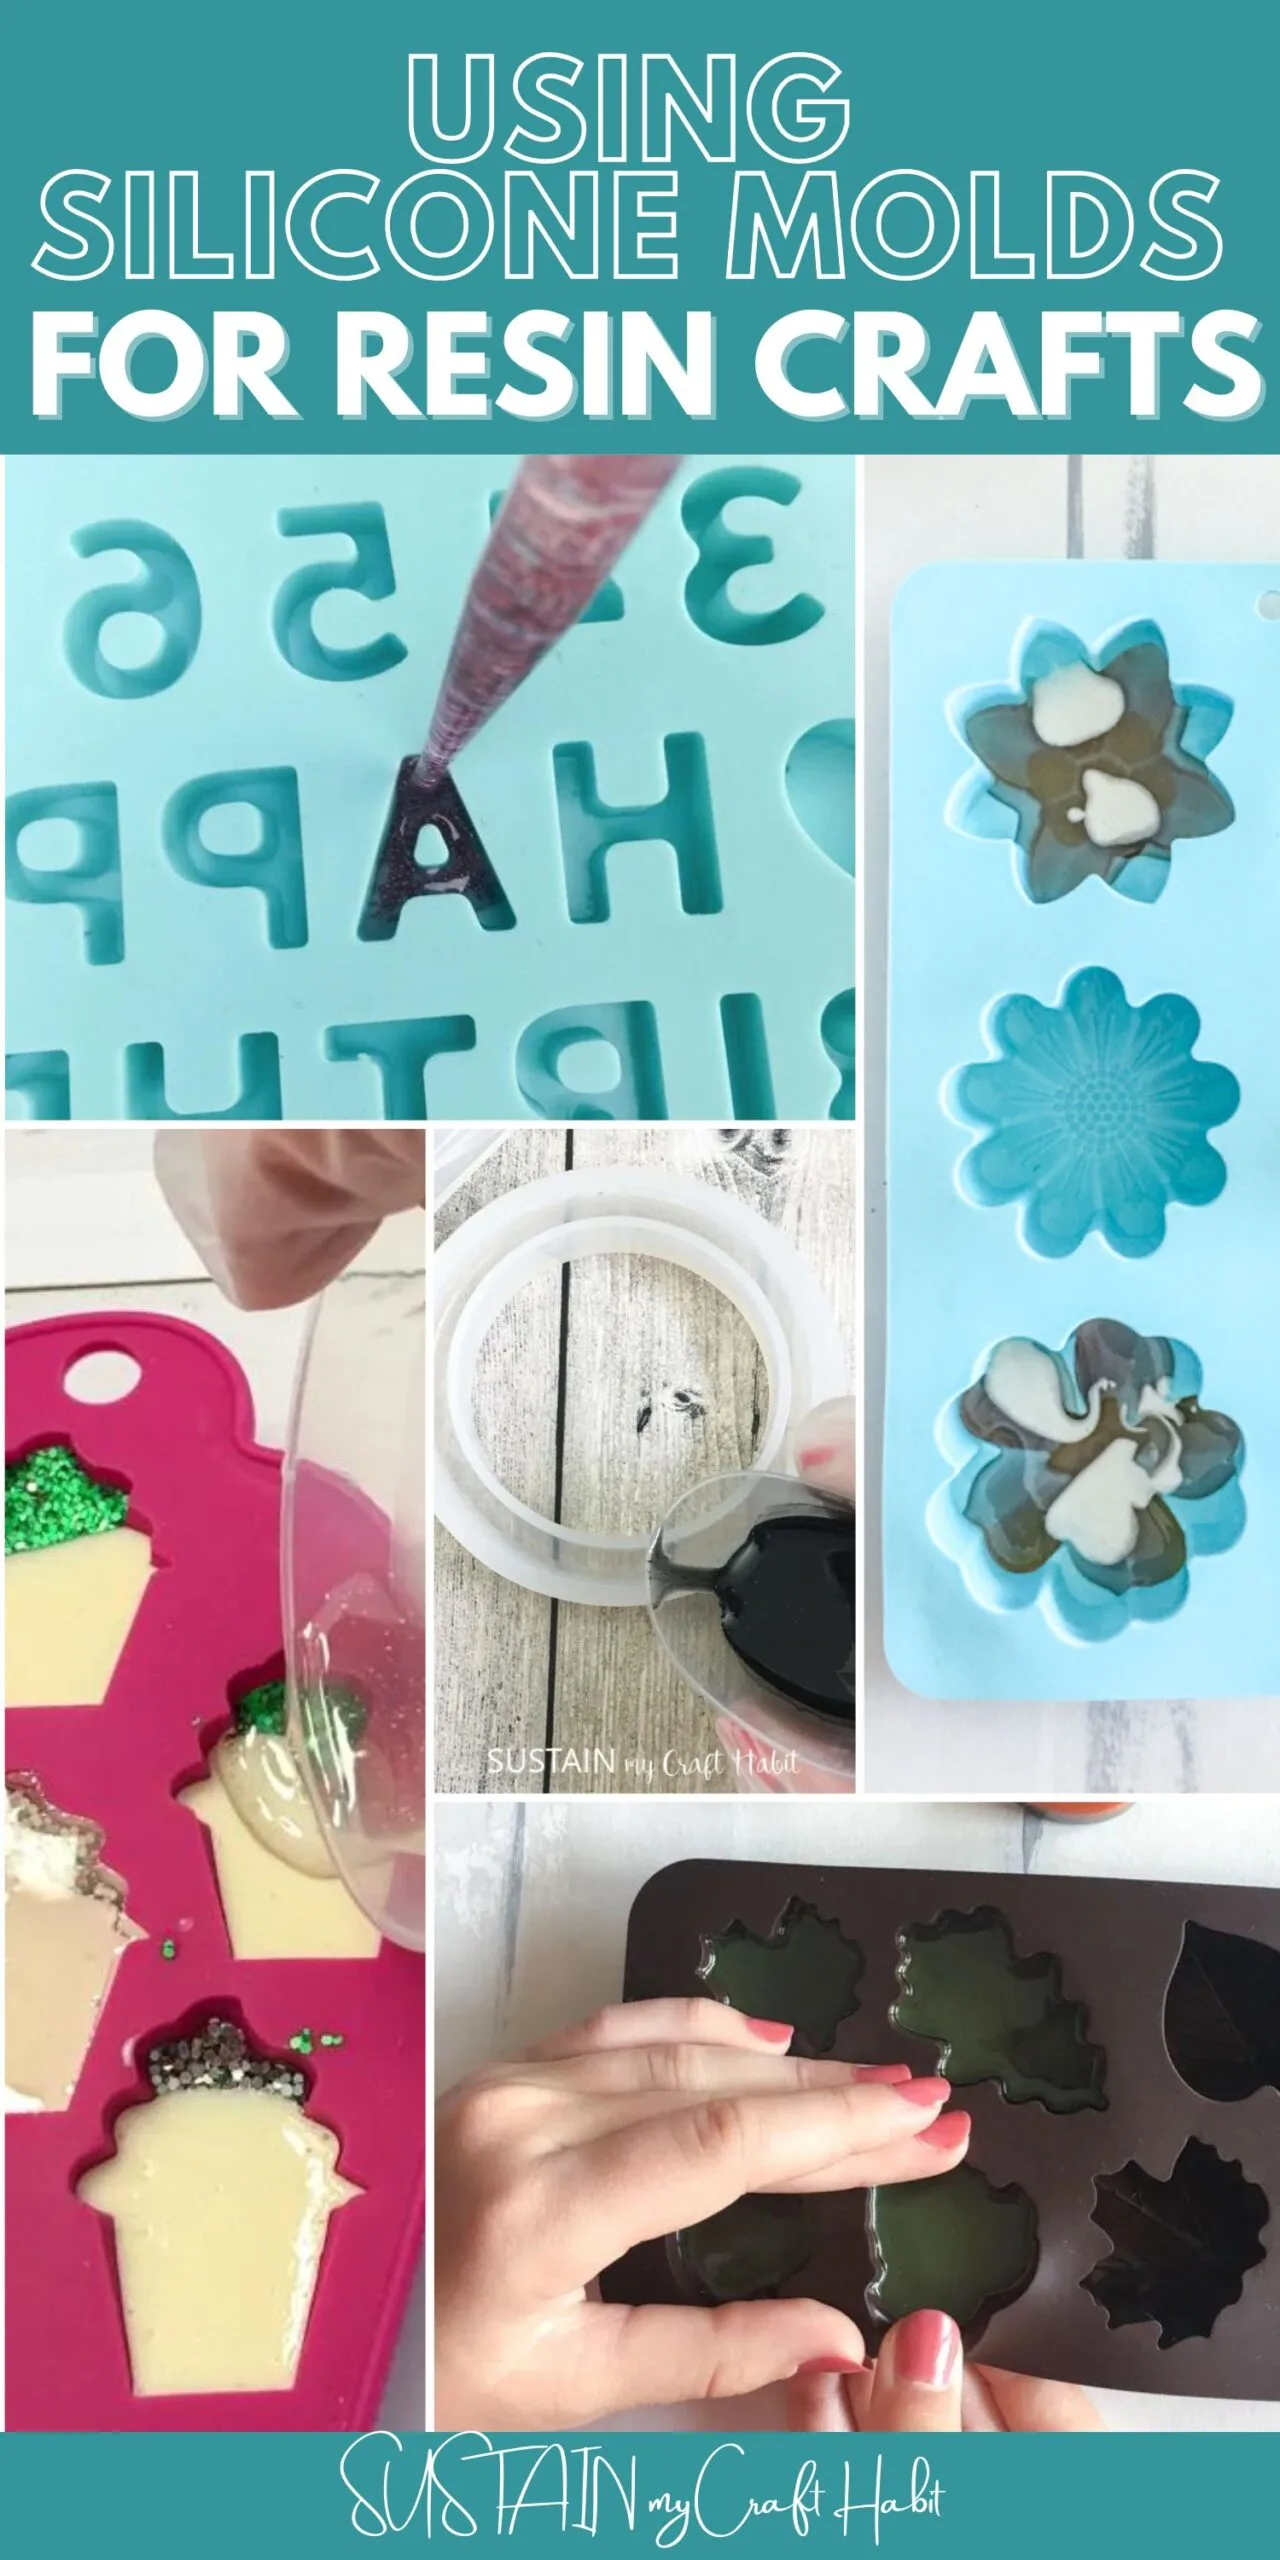 How to Make Food Grade Silicone Molds - Resin Crafts Blog